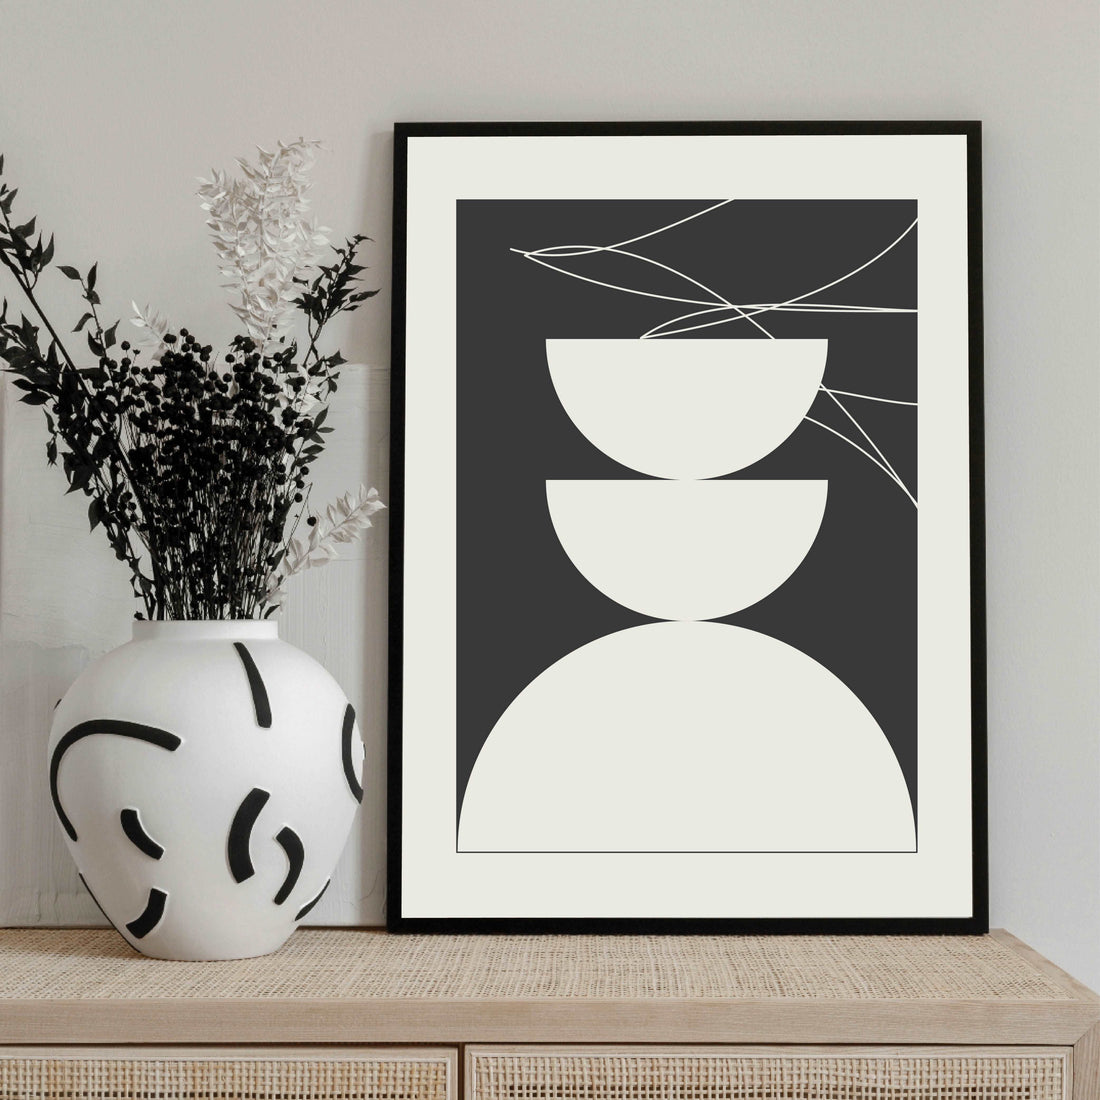 Poster Abstract Balance - Add sophistication to your home